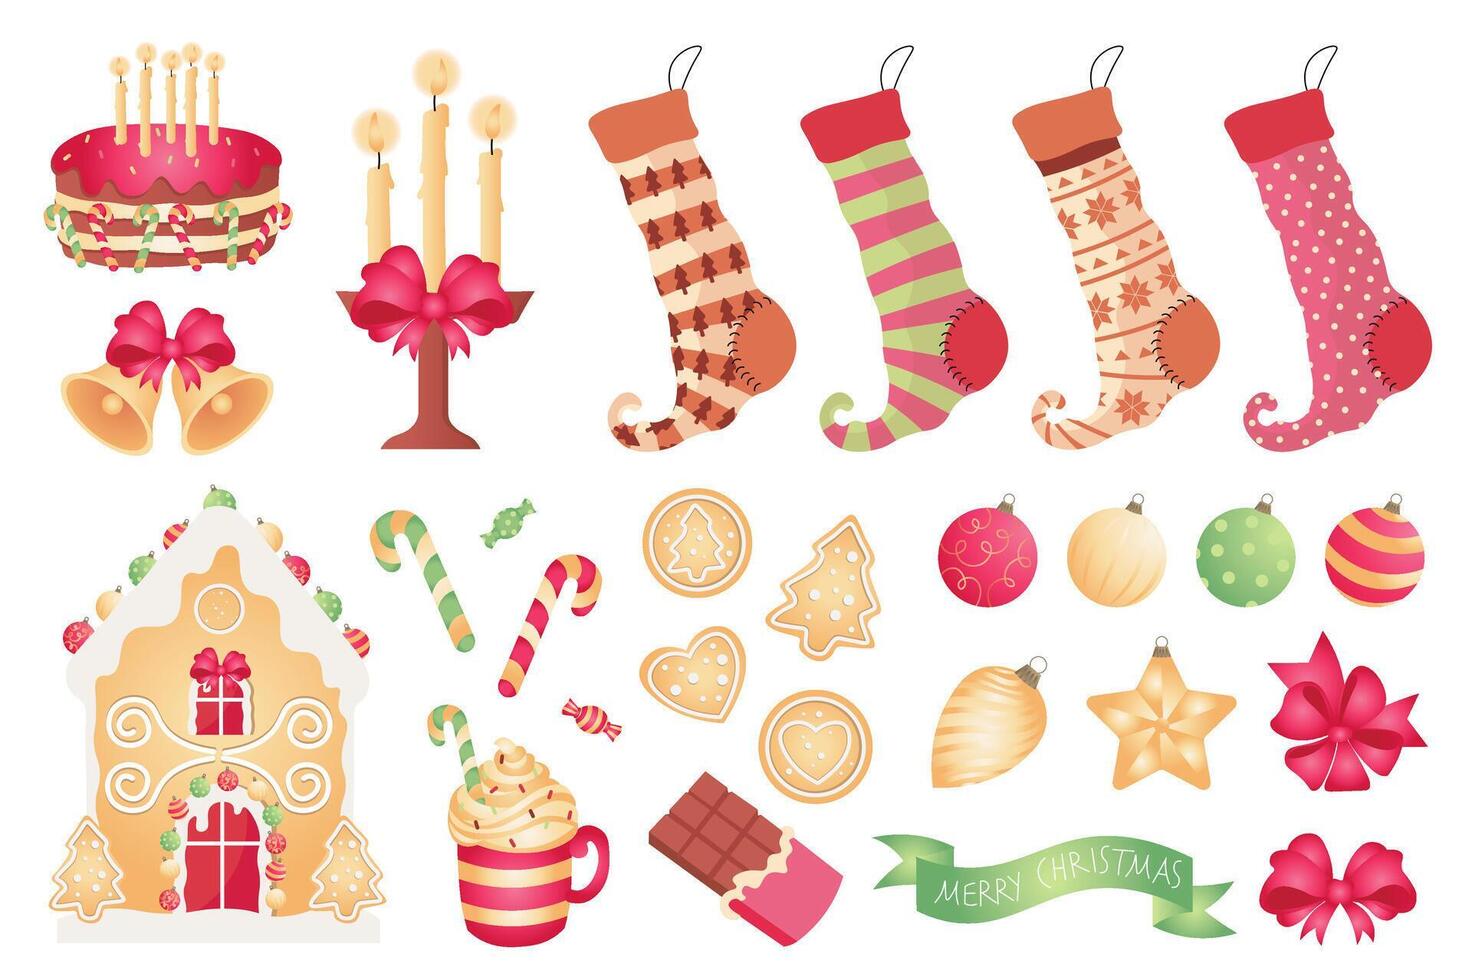 Christmas attributes mega set elements in flat design. Bundle of cake, candles, socks, bells, gingerbread cookies, house, cocoa mug, toy balls and other. Vector illustration isolated graphic objects